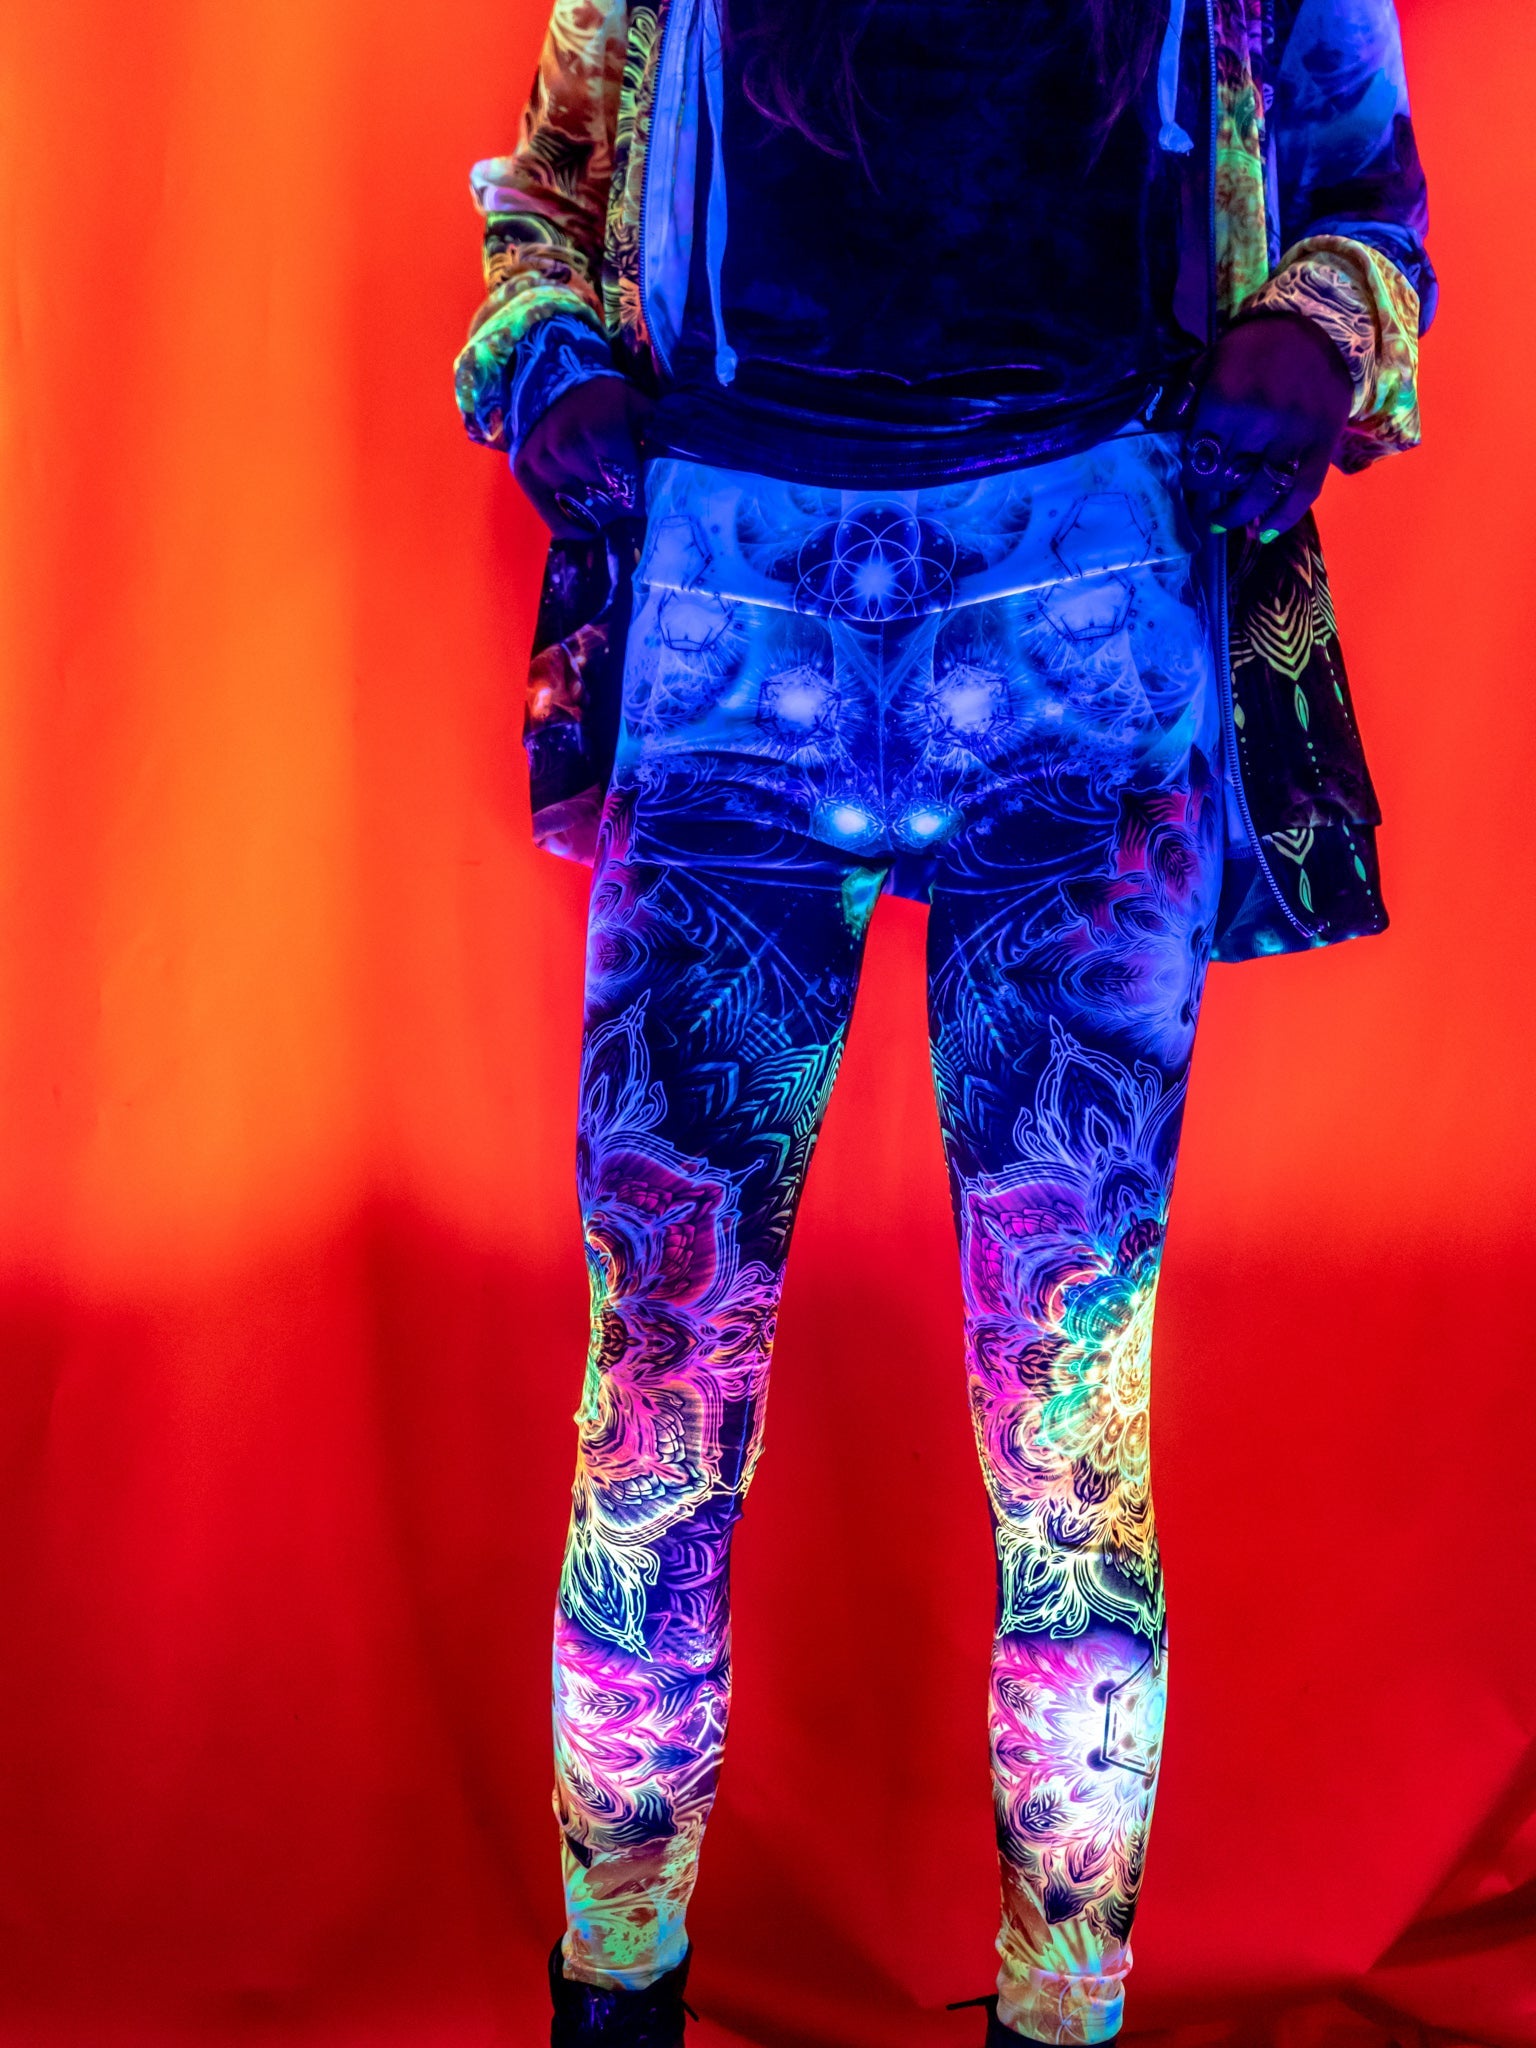 11 Pairs of Neon Leggings That Are Totally Wearable (We Promise)